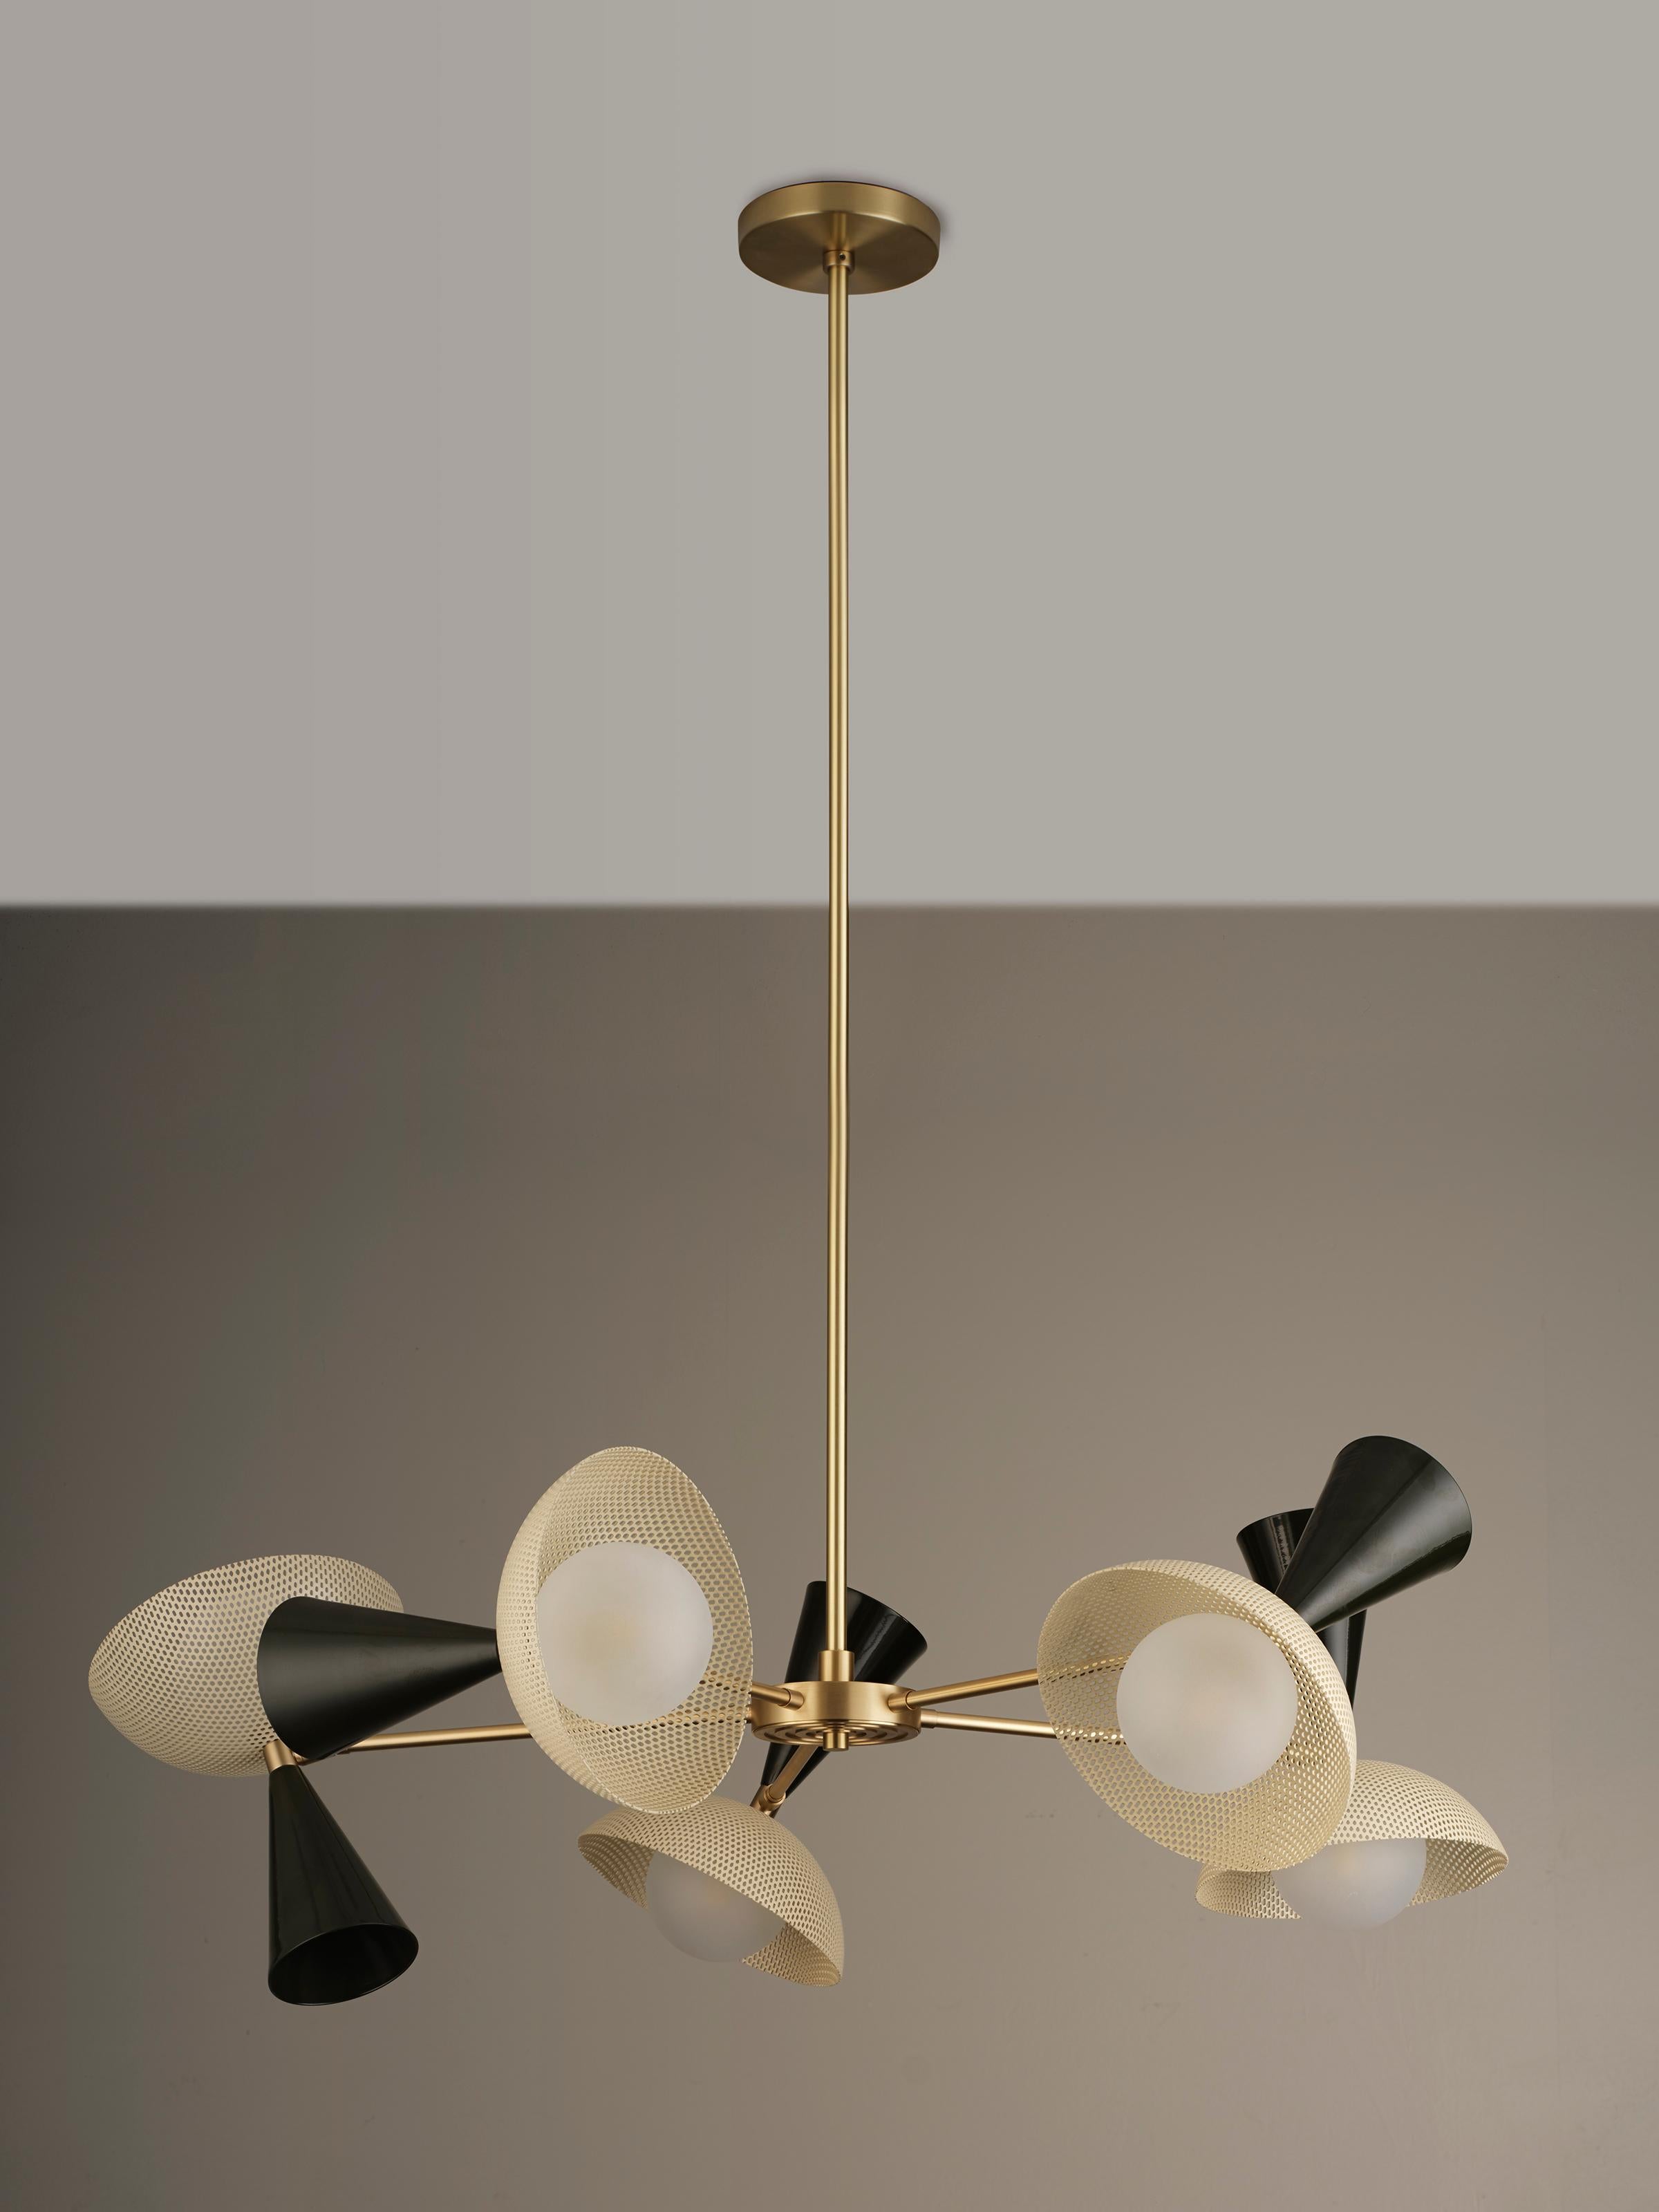 Contemporary Molto 5-Arm Ceiling Fixture in Brushed Brass + Enameled Mesh, Blueprint Lighting For Sale